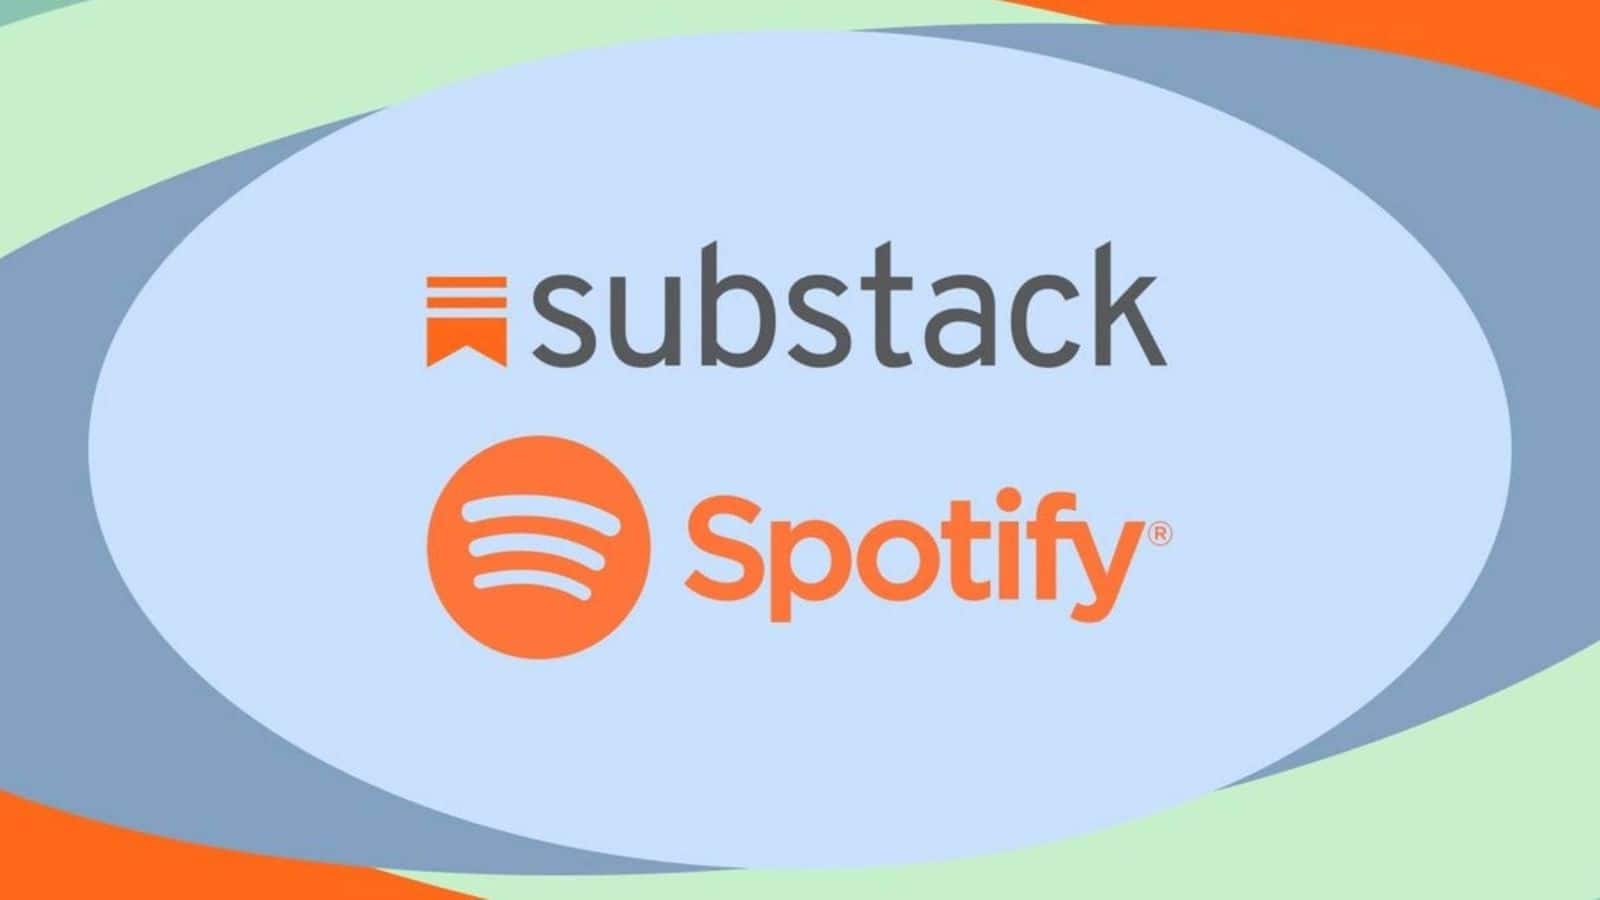 Spotify partners with Substack to expand podcast content